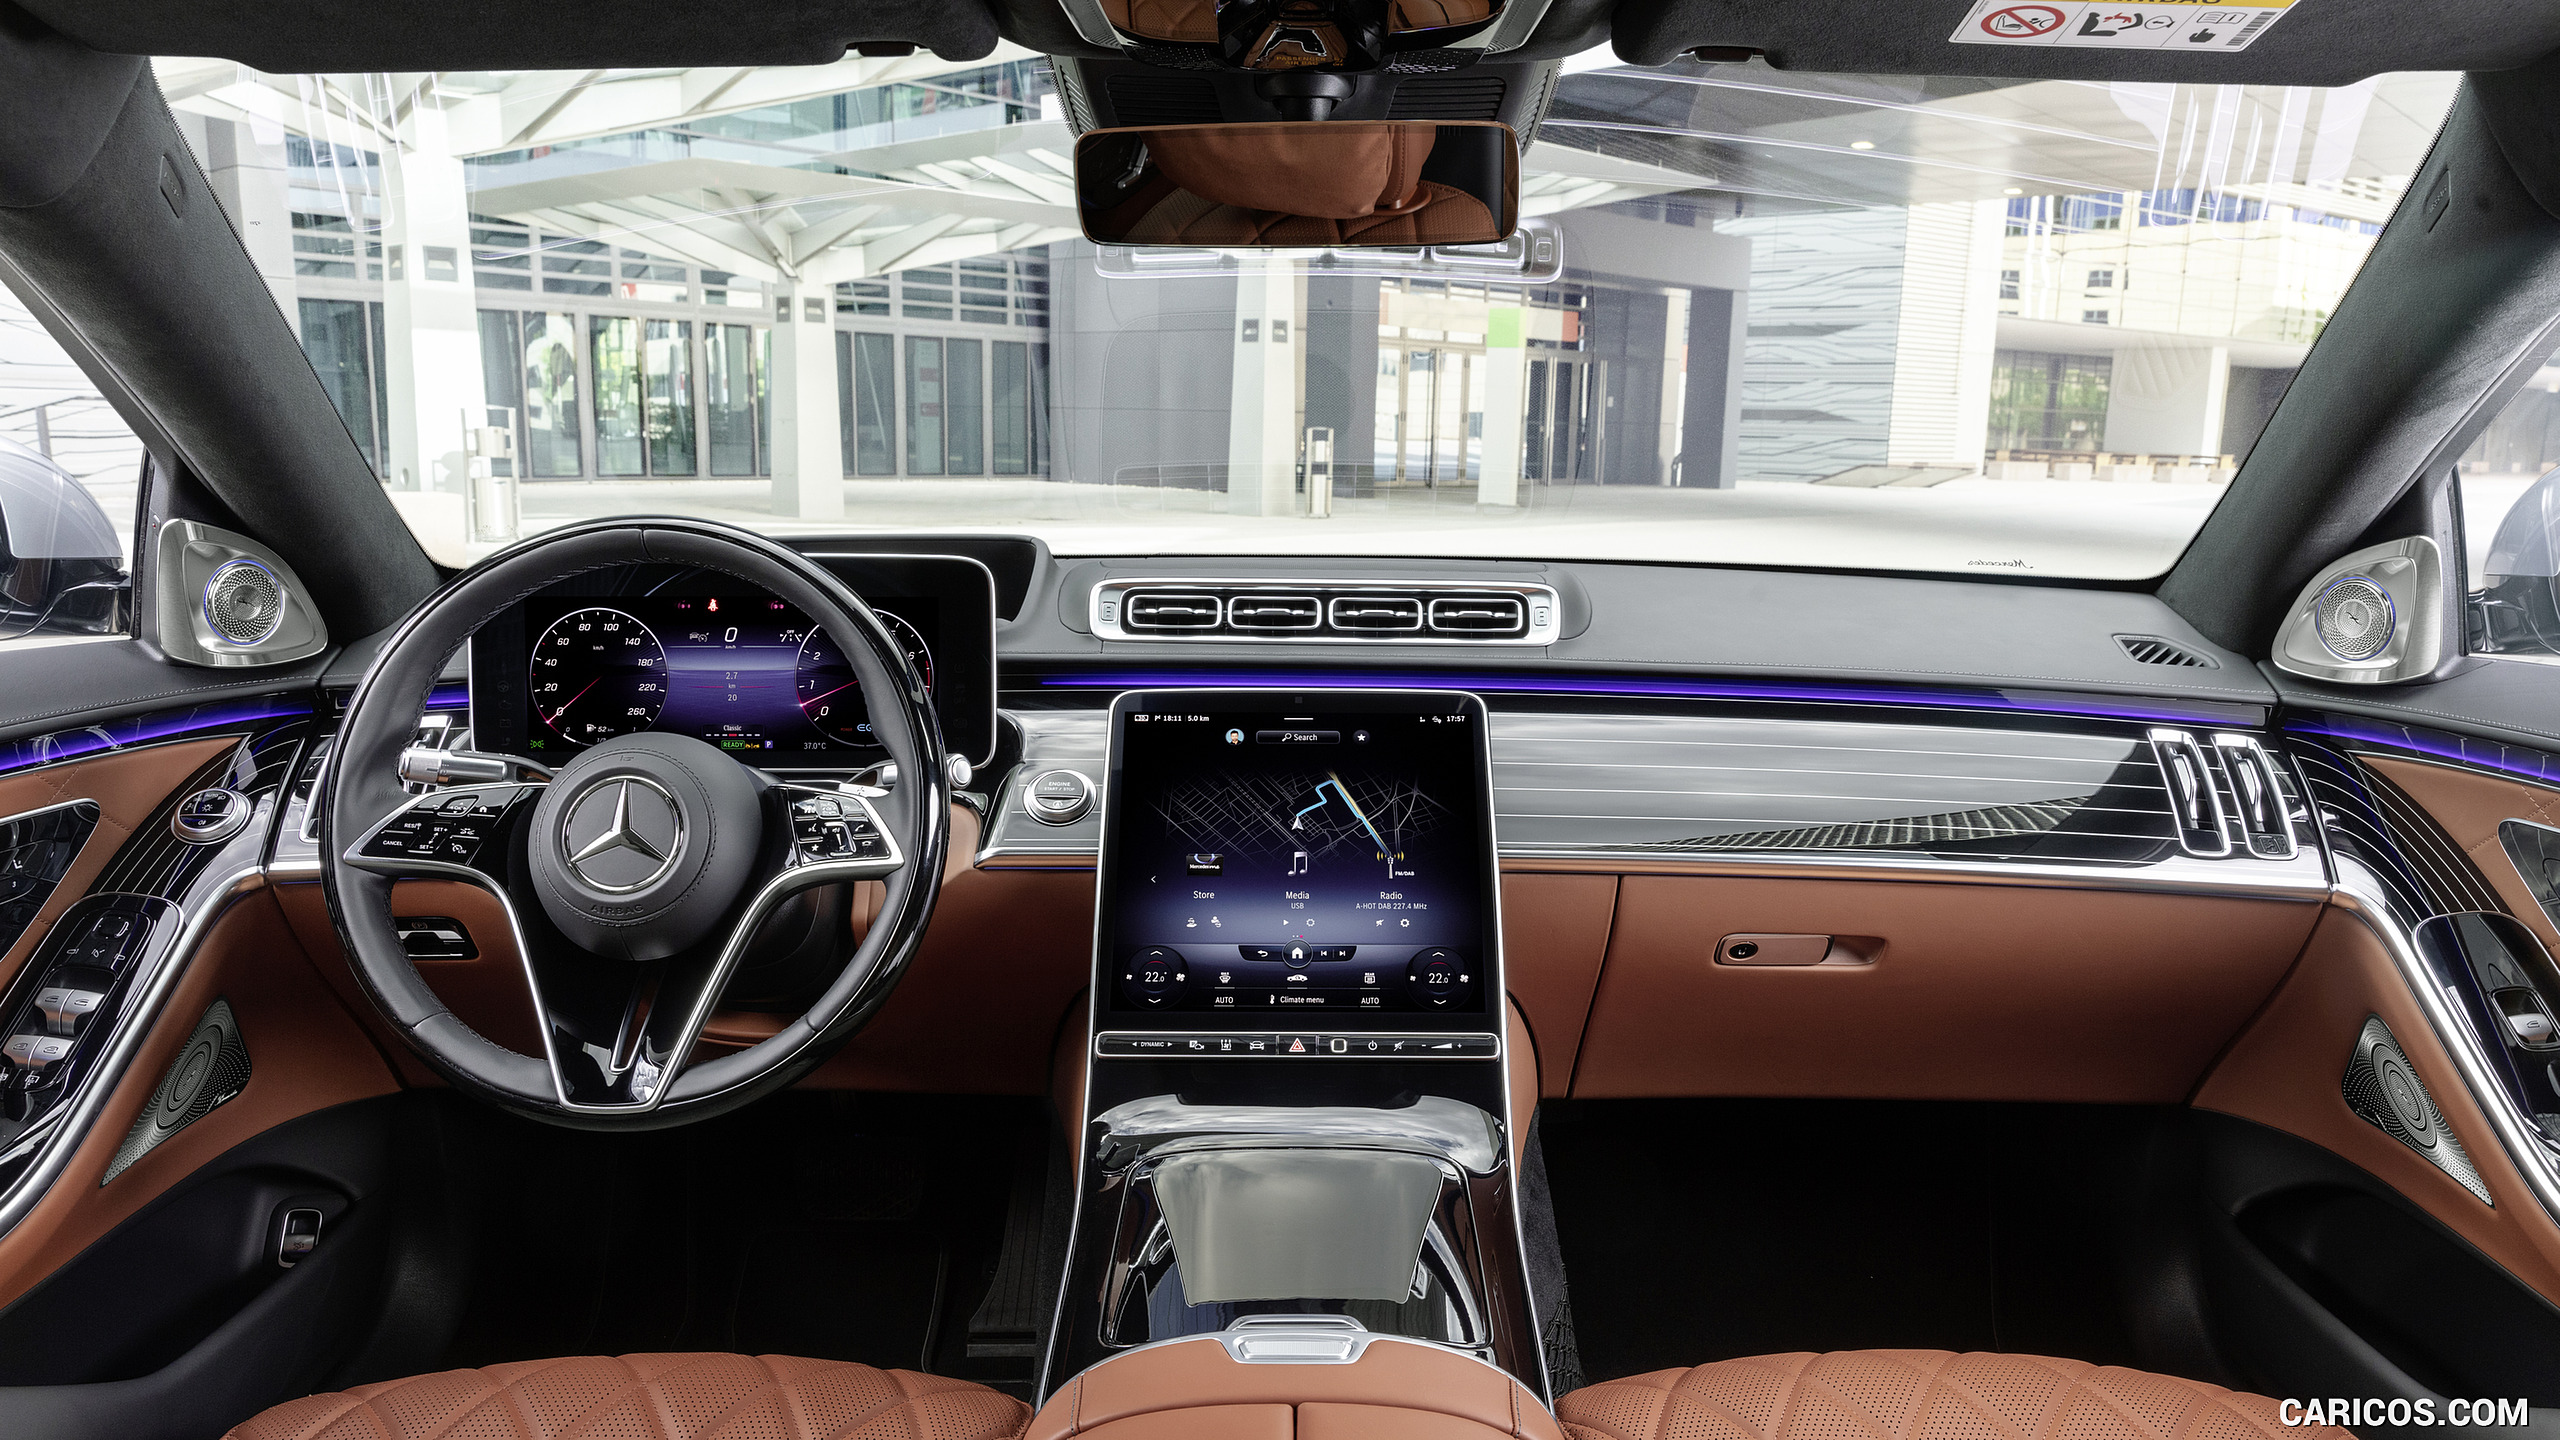 2021 Mercedes-Benz S-Class (Color: Leather Siena Brown) - Interior, Cockpit, #112 of 316